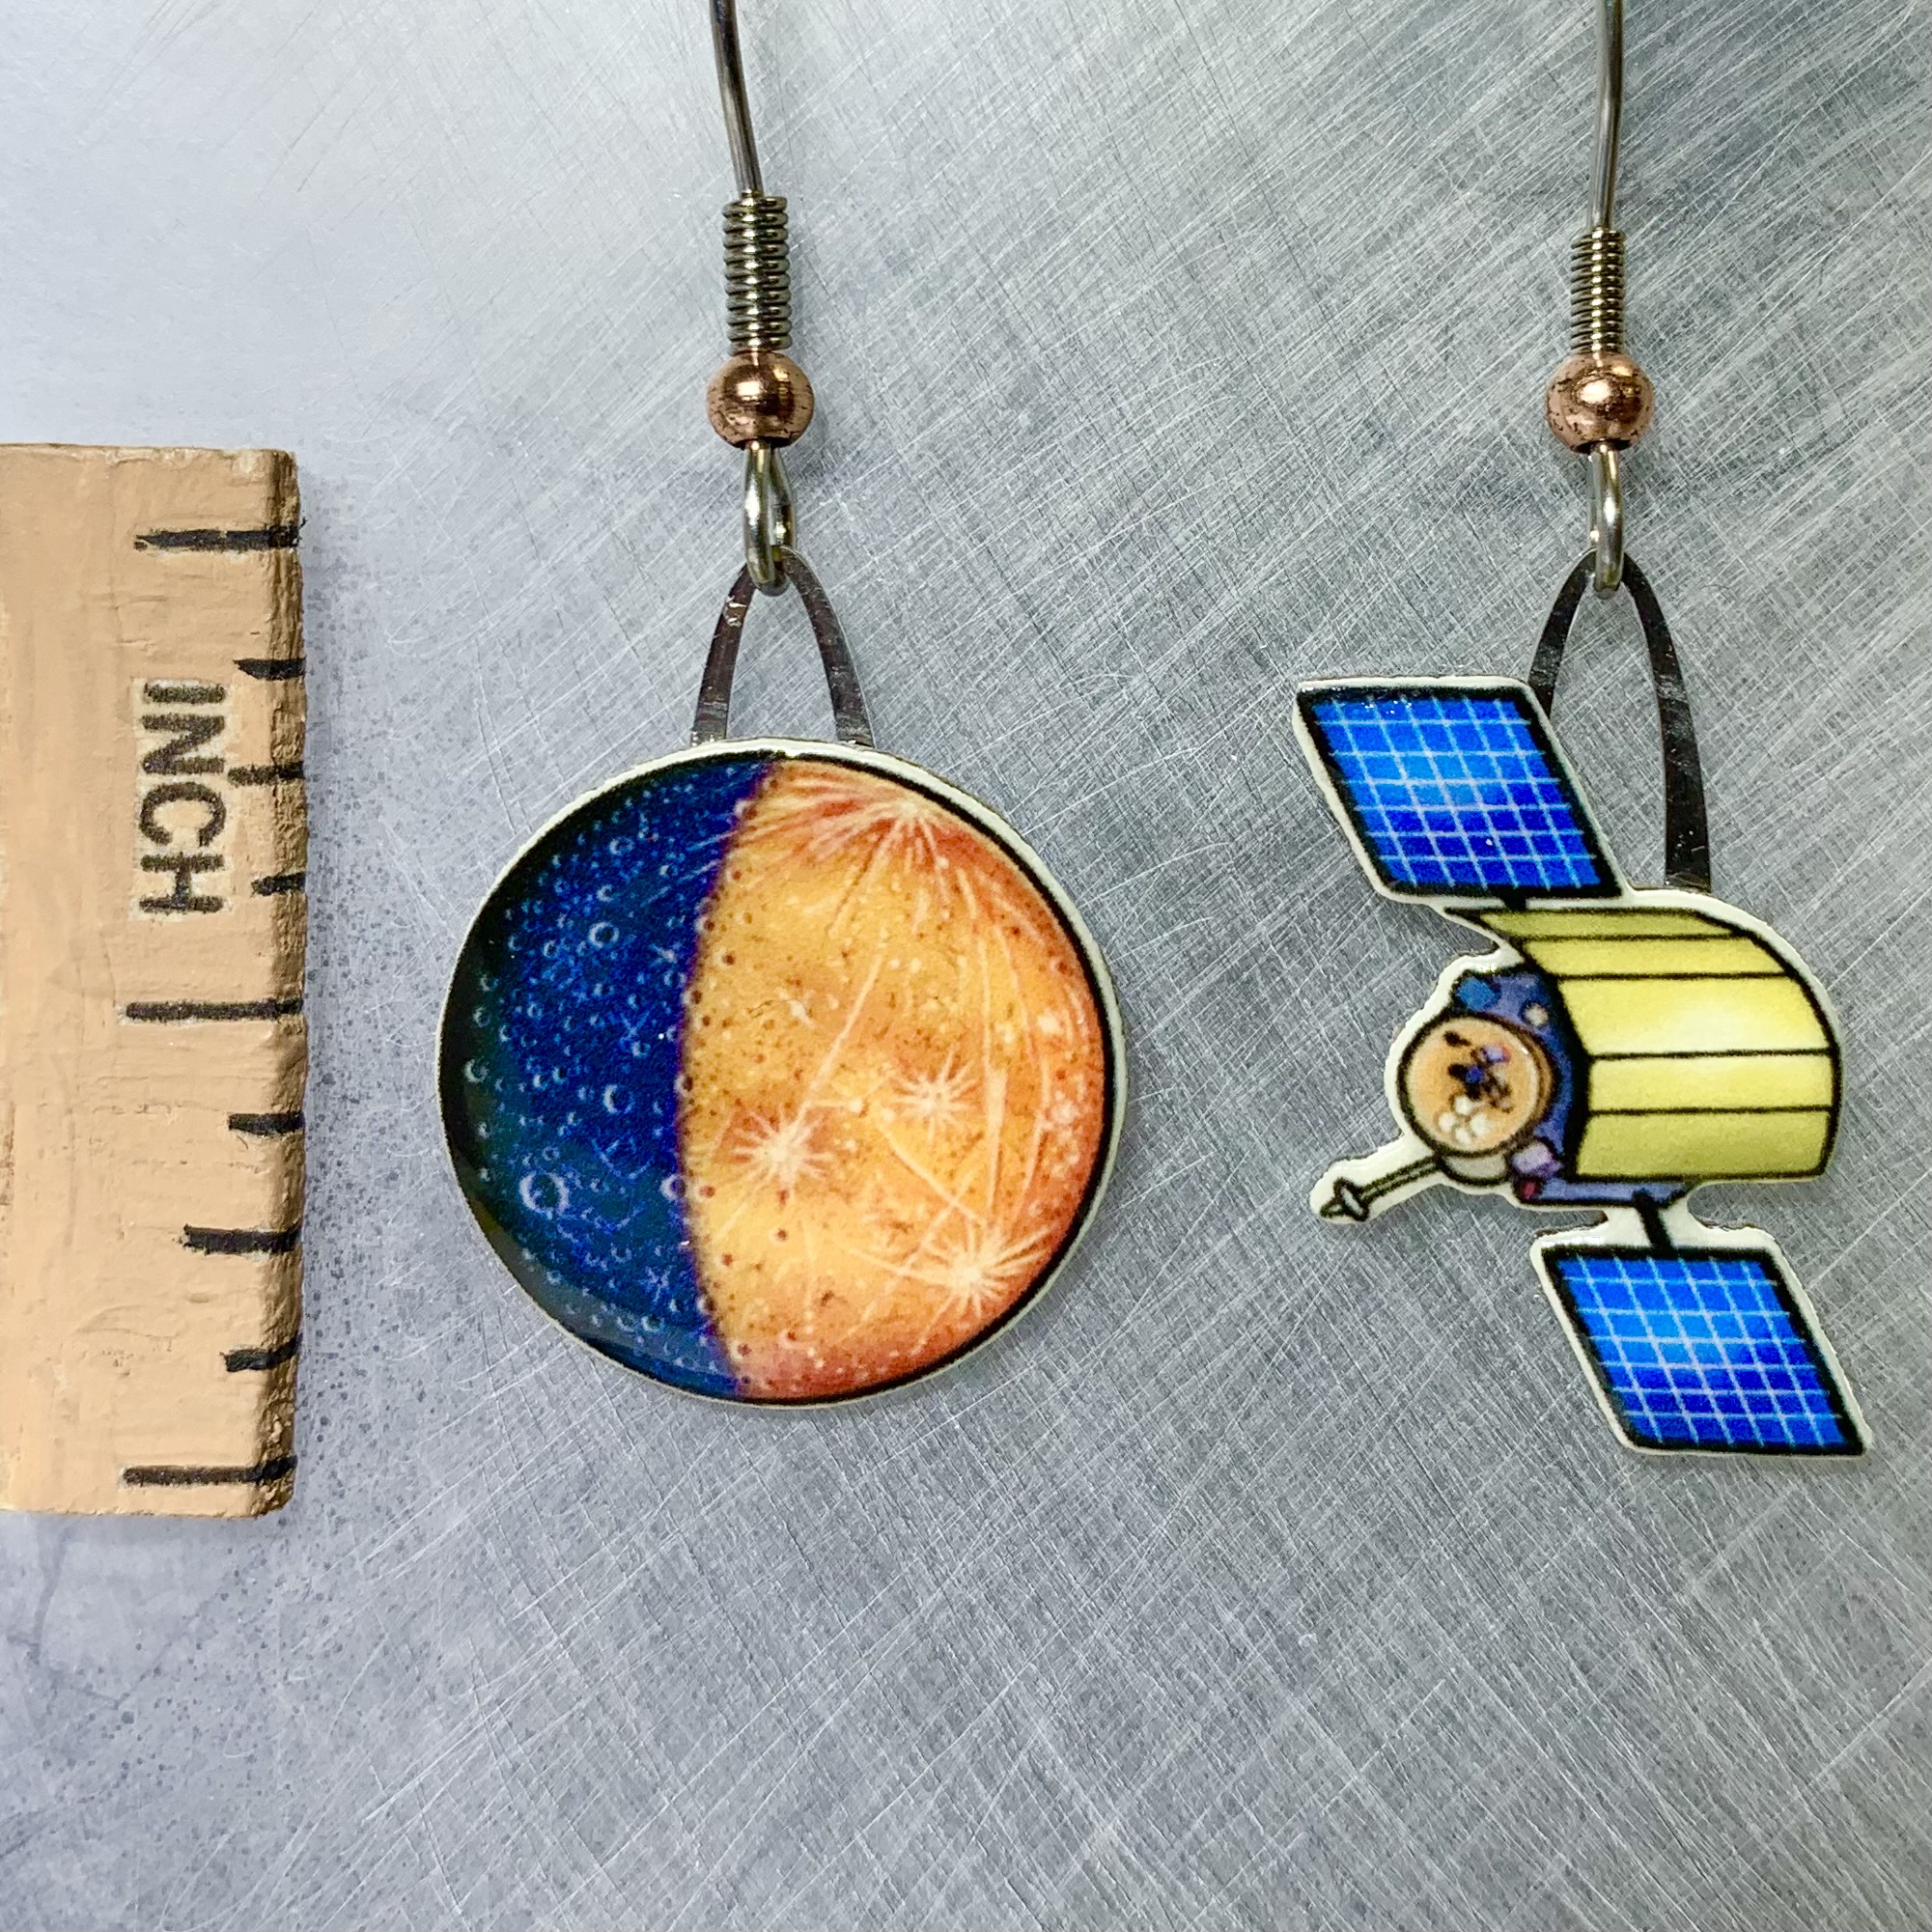 Picture shown is of 1 inch tall pair of earrings of Mercury & Messenger.